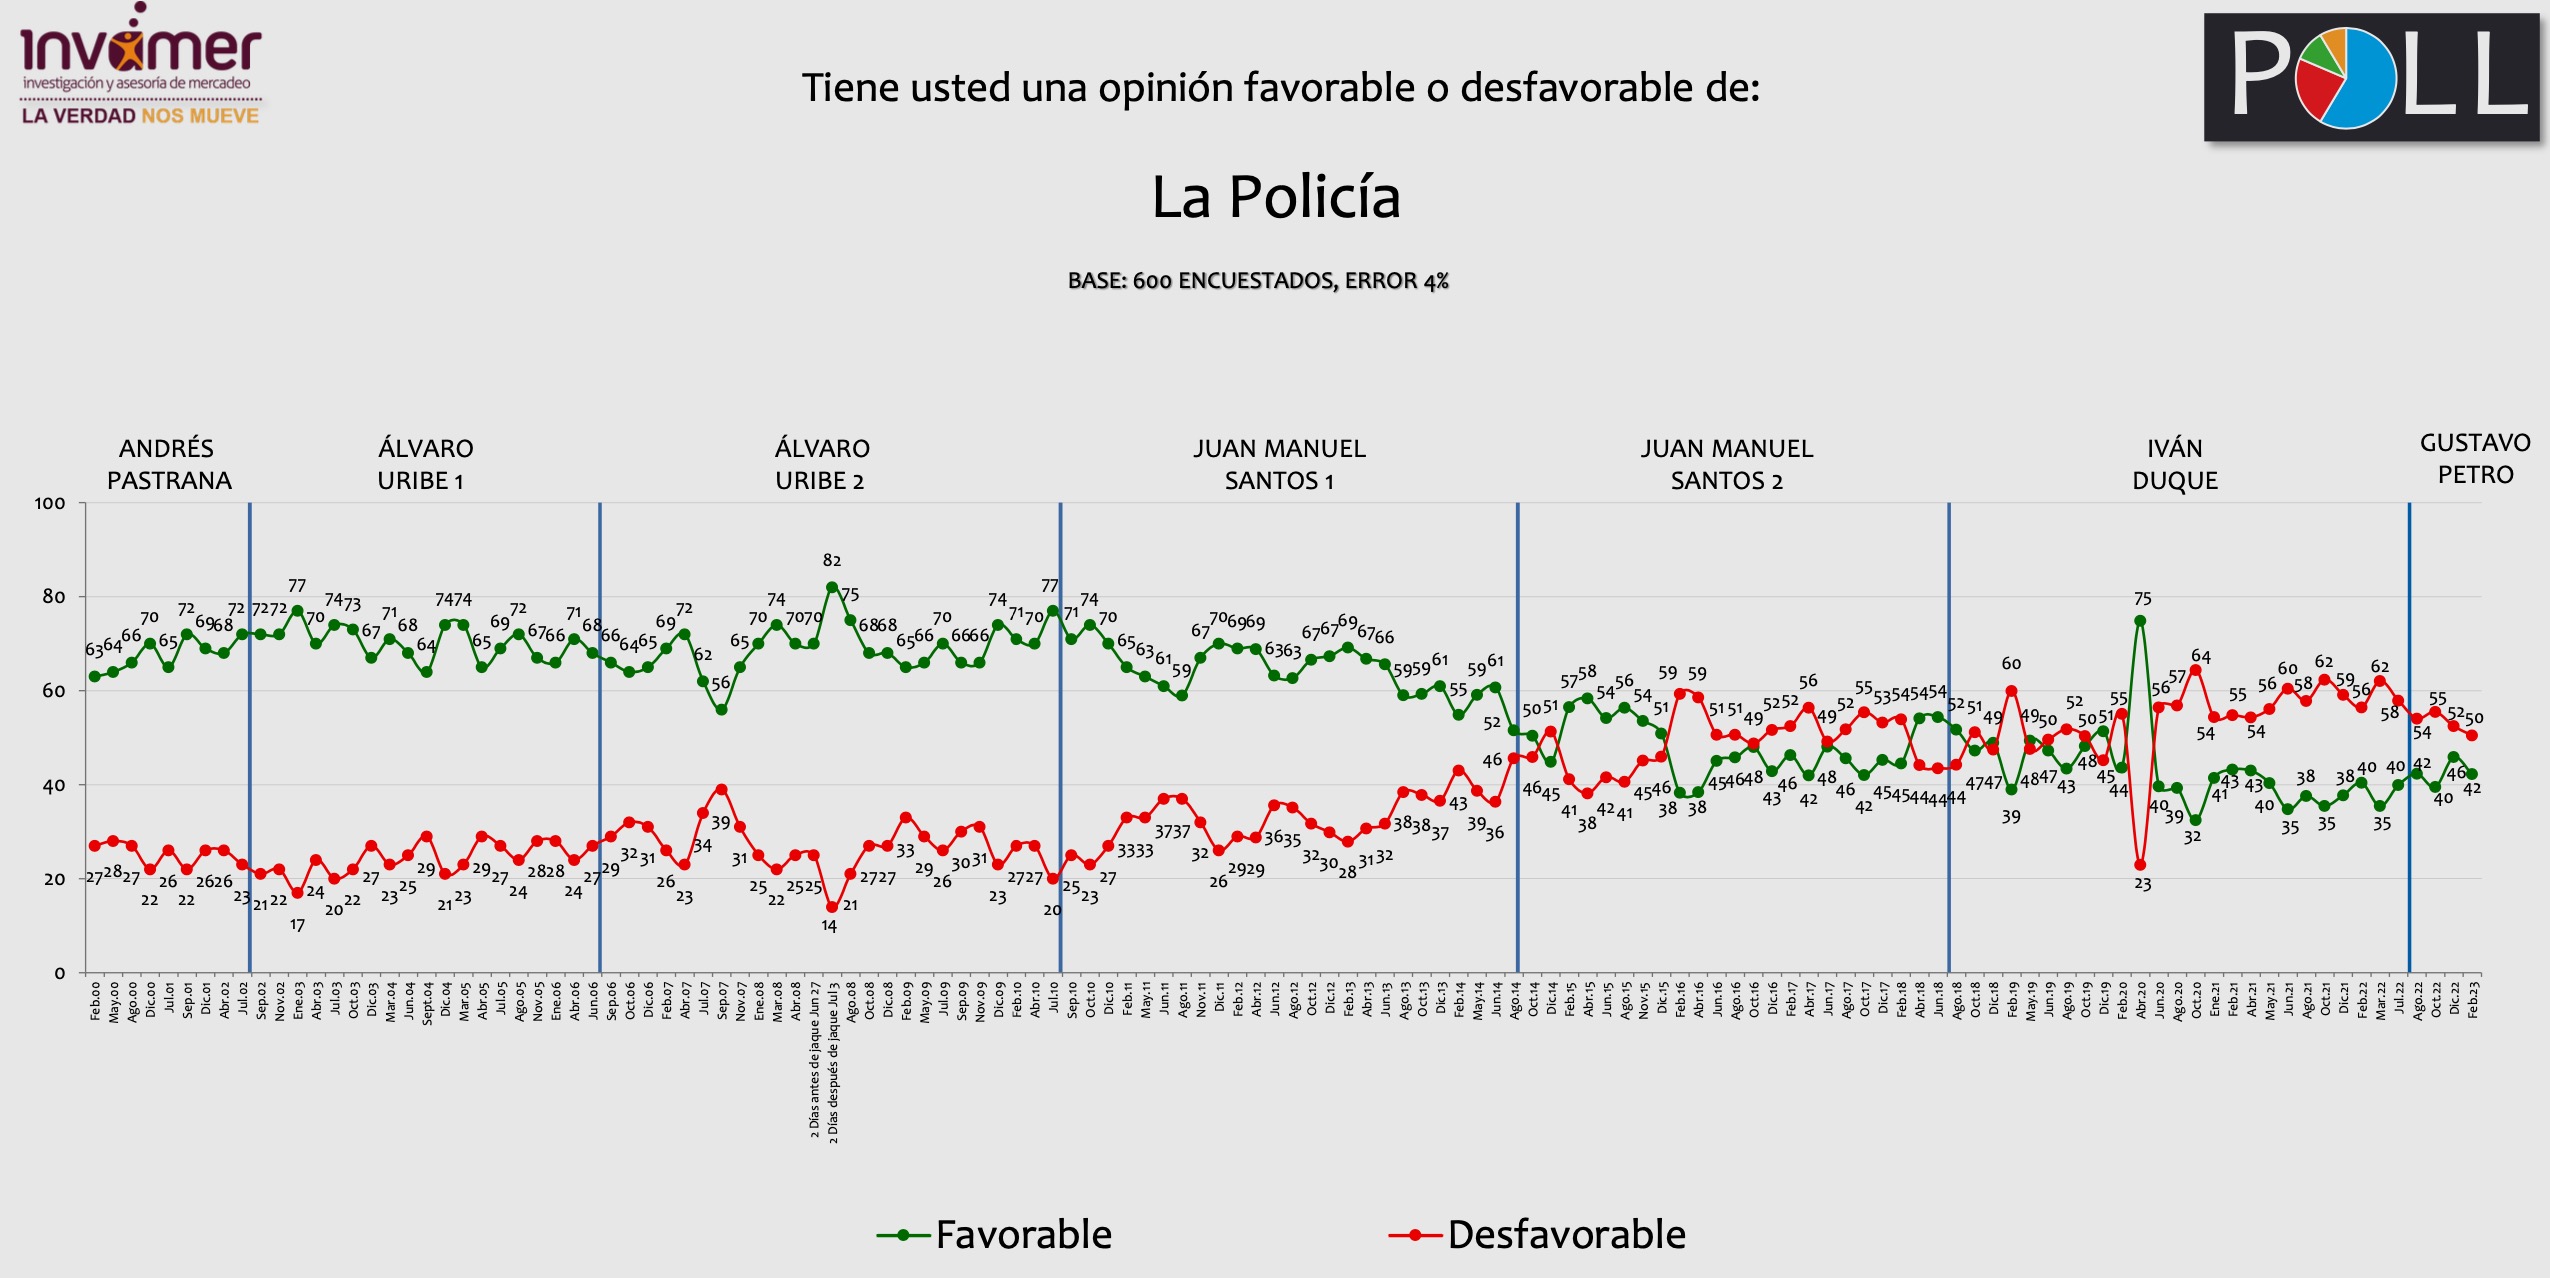 Time series shows Colombia's police first being more unfavorable than favorable circa 2016, then decidedly so after mid-2020. Latest is 42% favorable, 50% unfavorable.